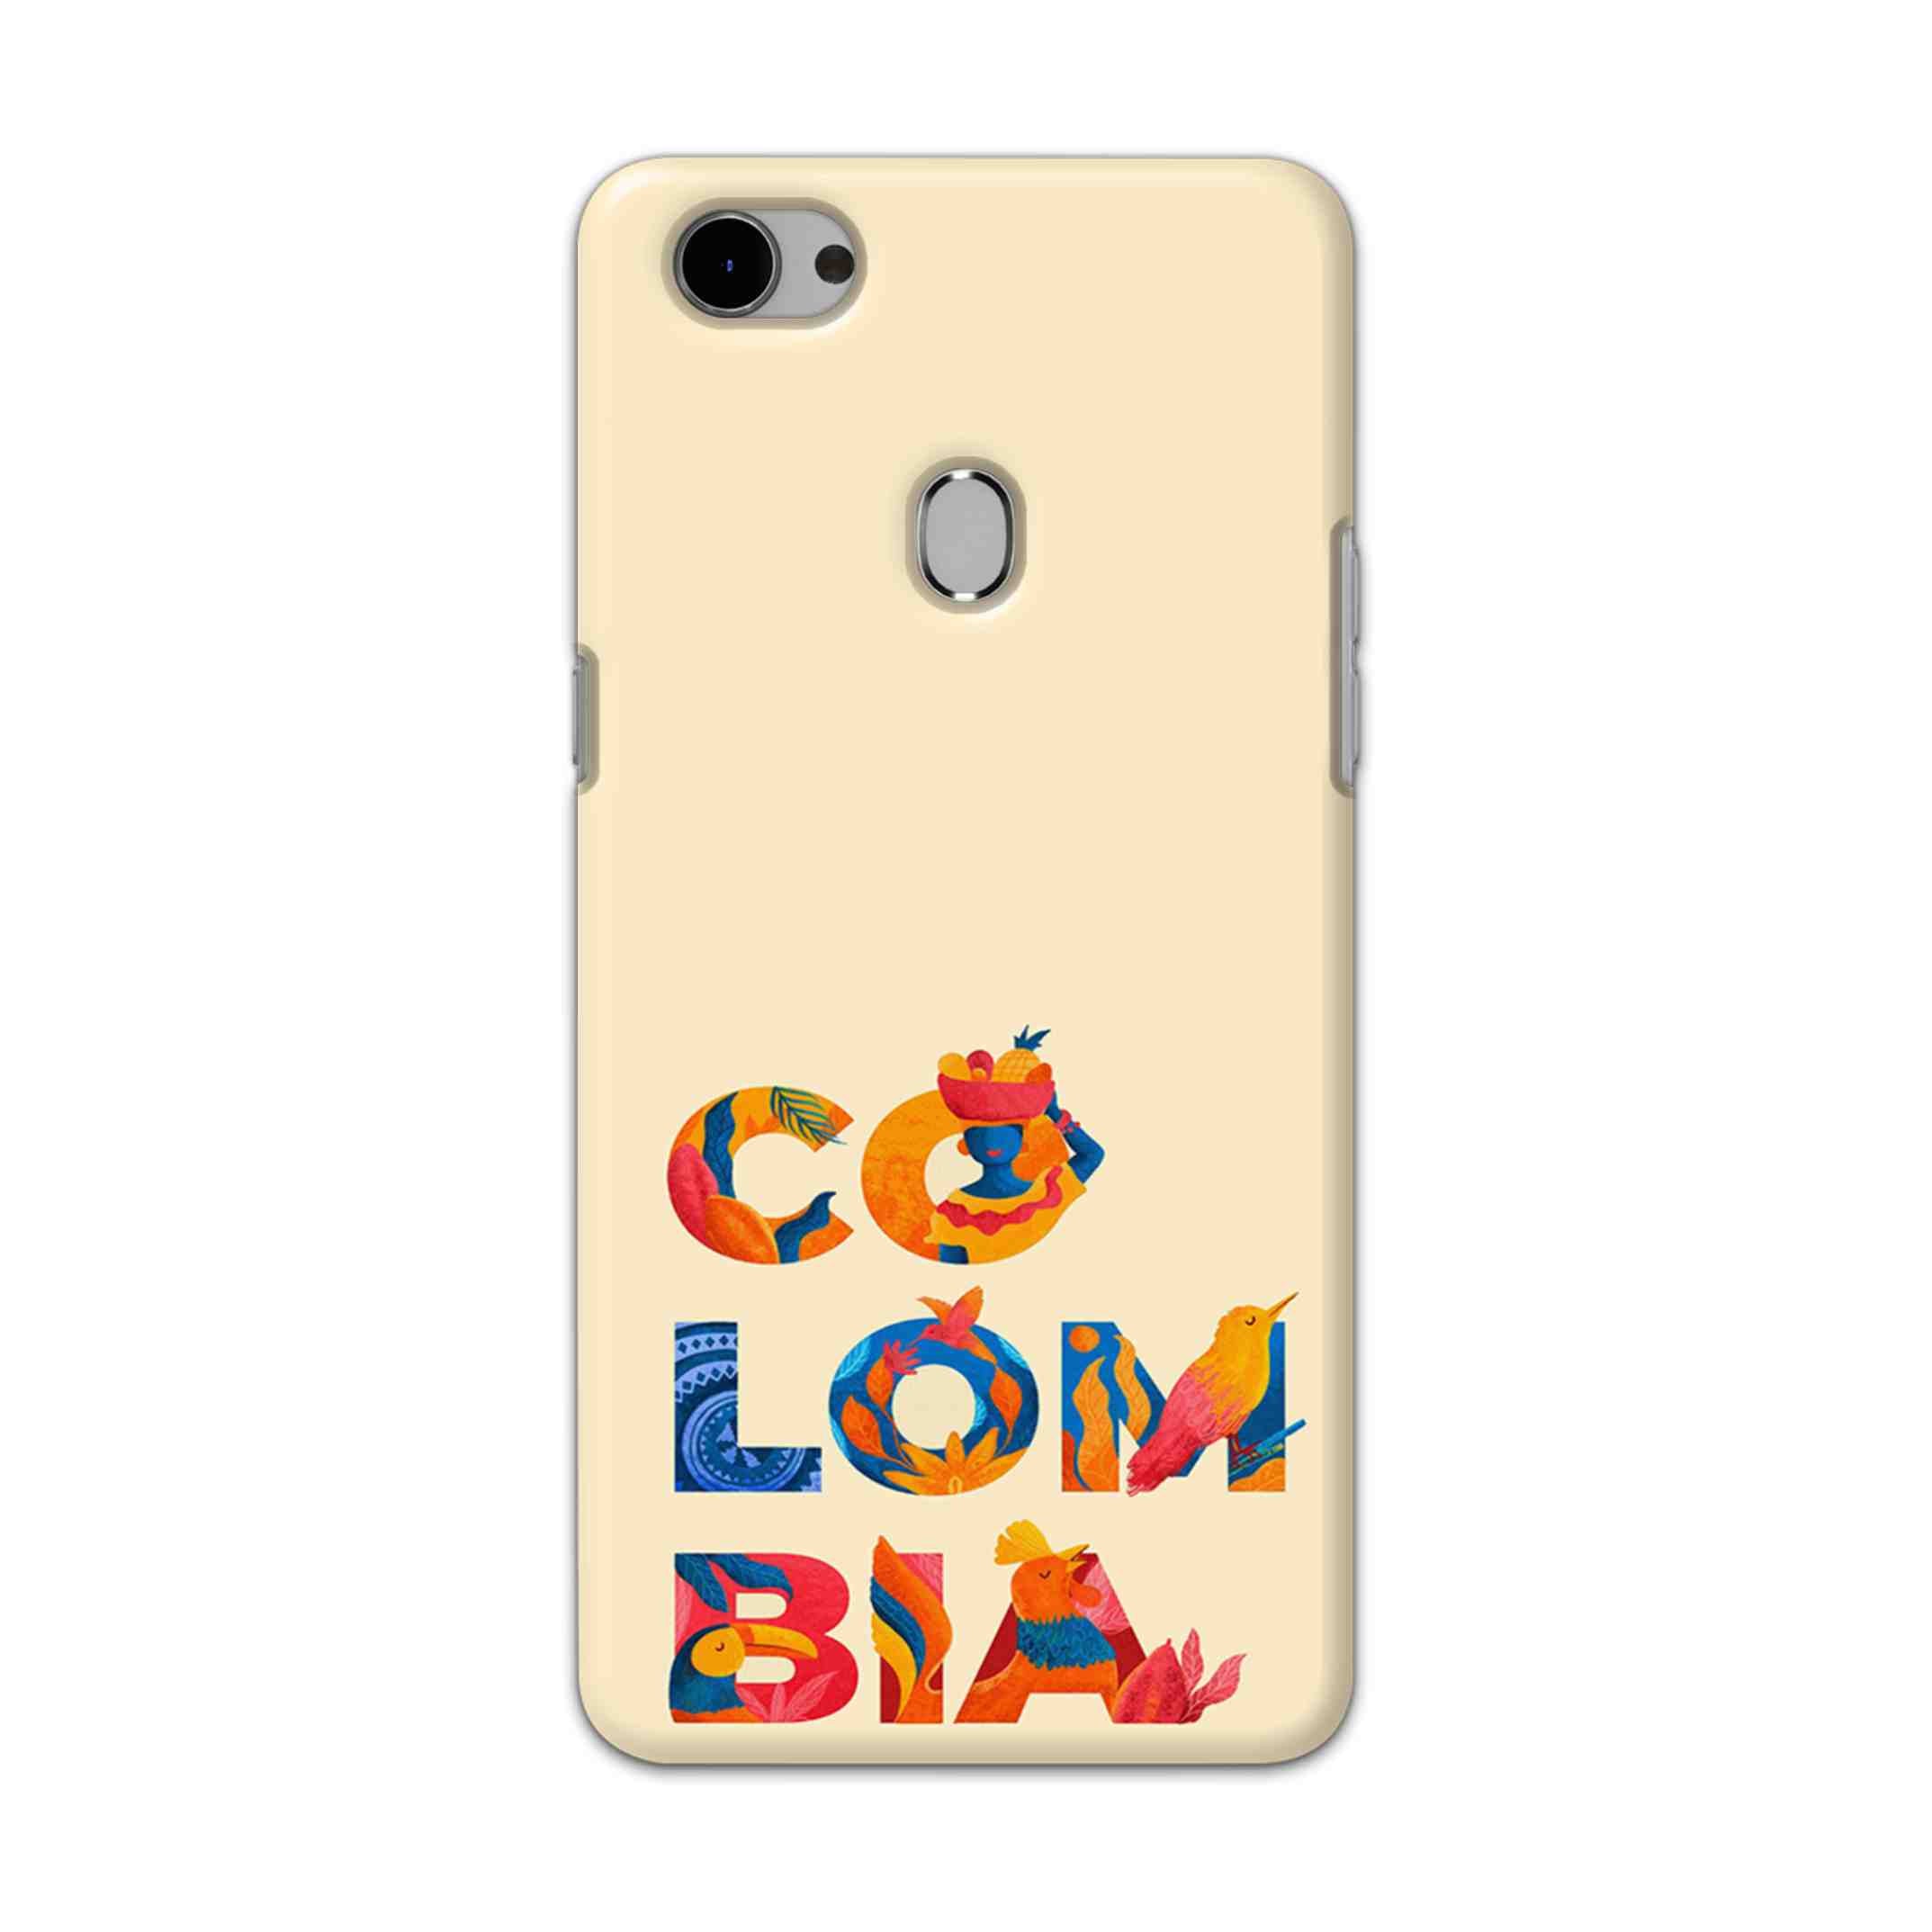 Buy Colombia Hard Back Mobile Phone Case Cover For Oppo F7 Online